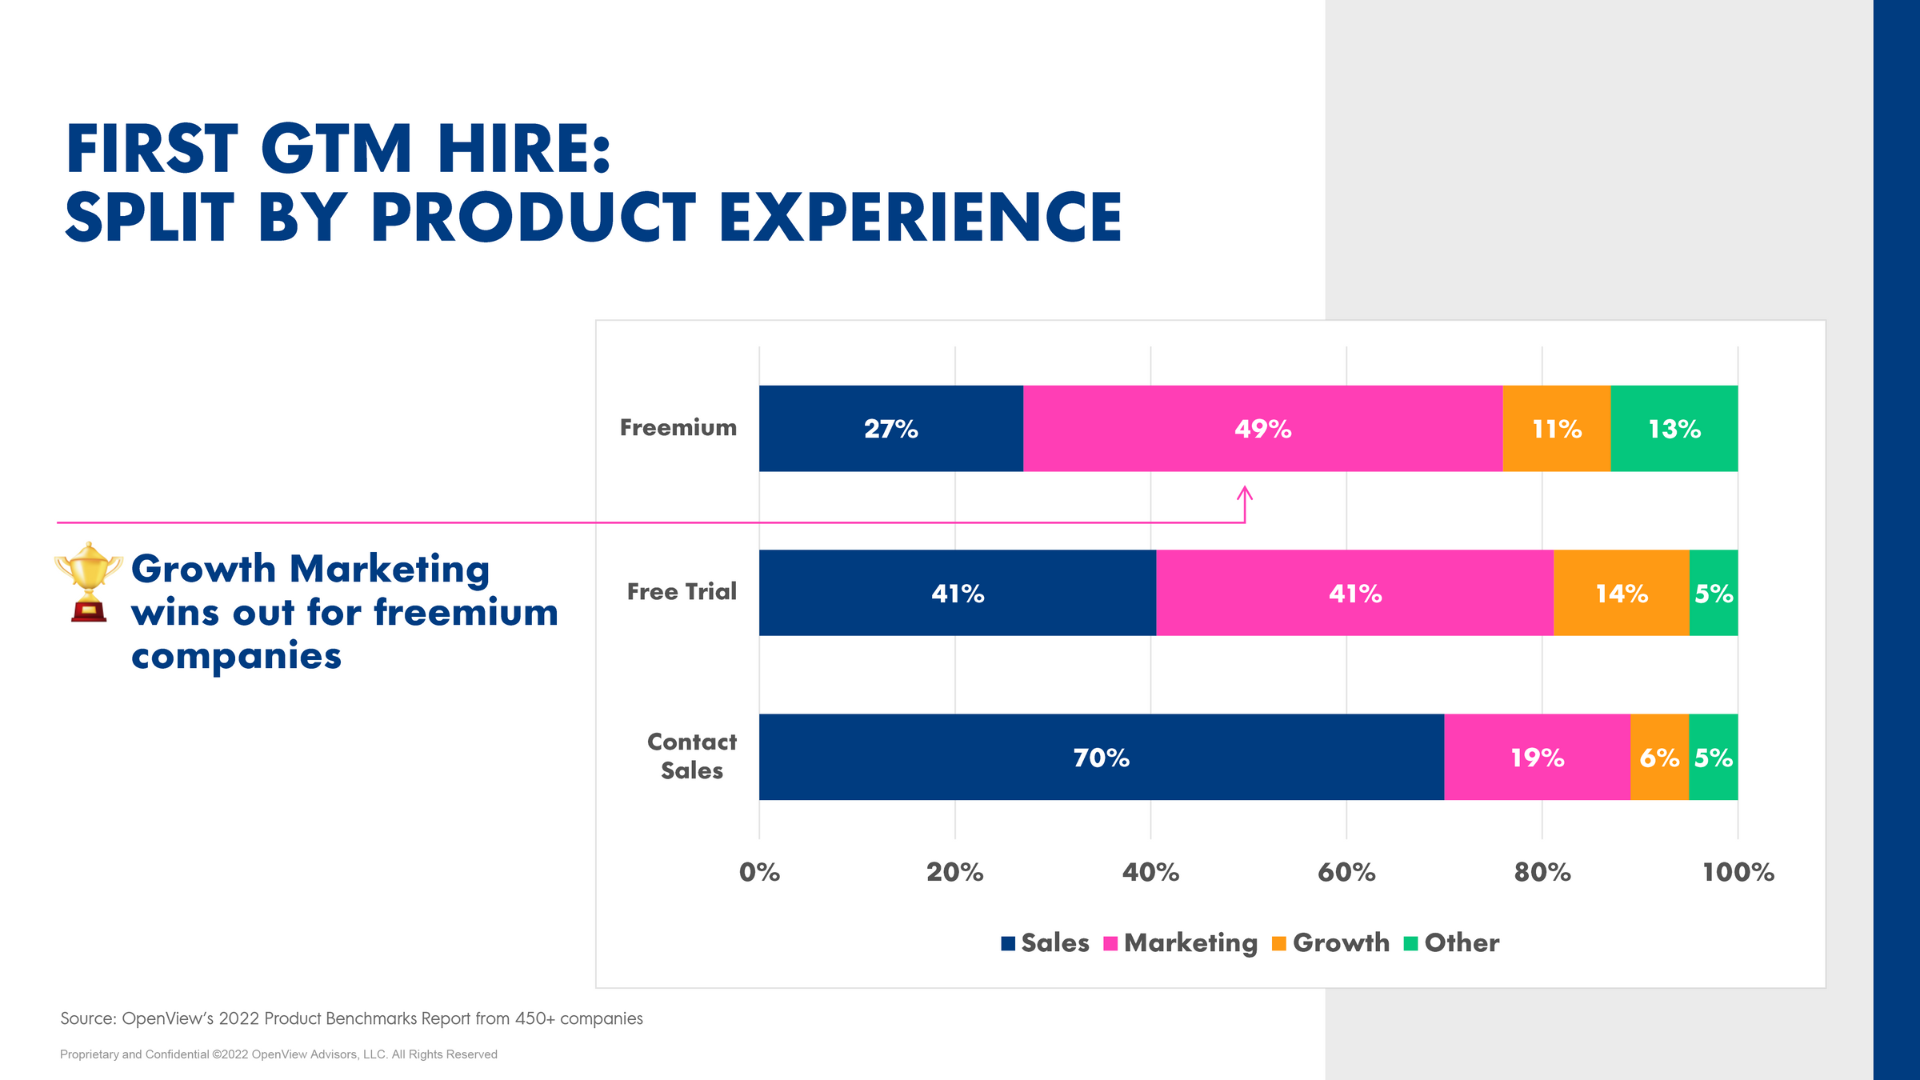 a horizontal bar chart explaining the percentages of first GTM hires categorized by product experience.